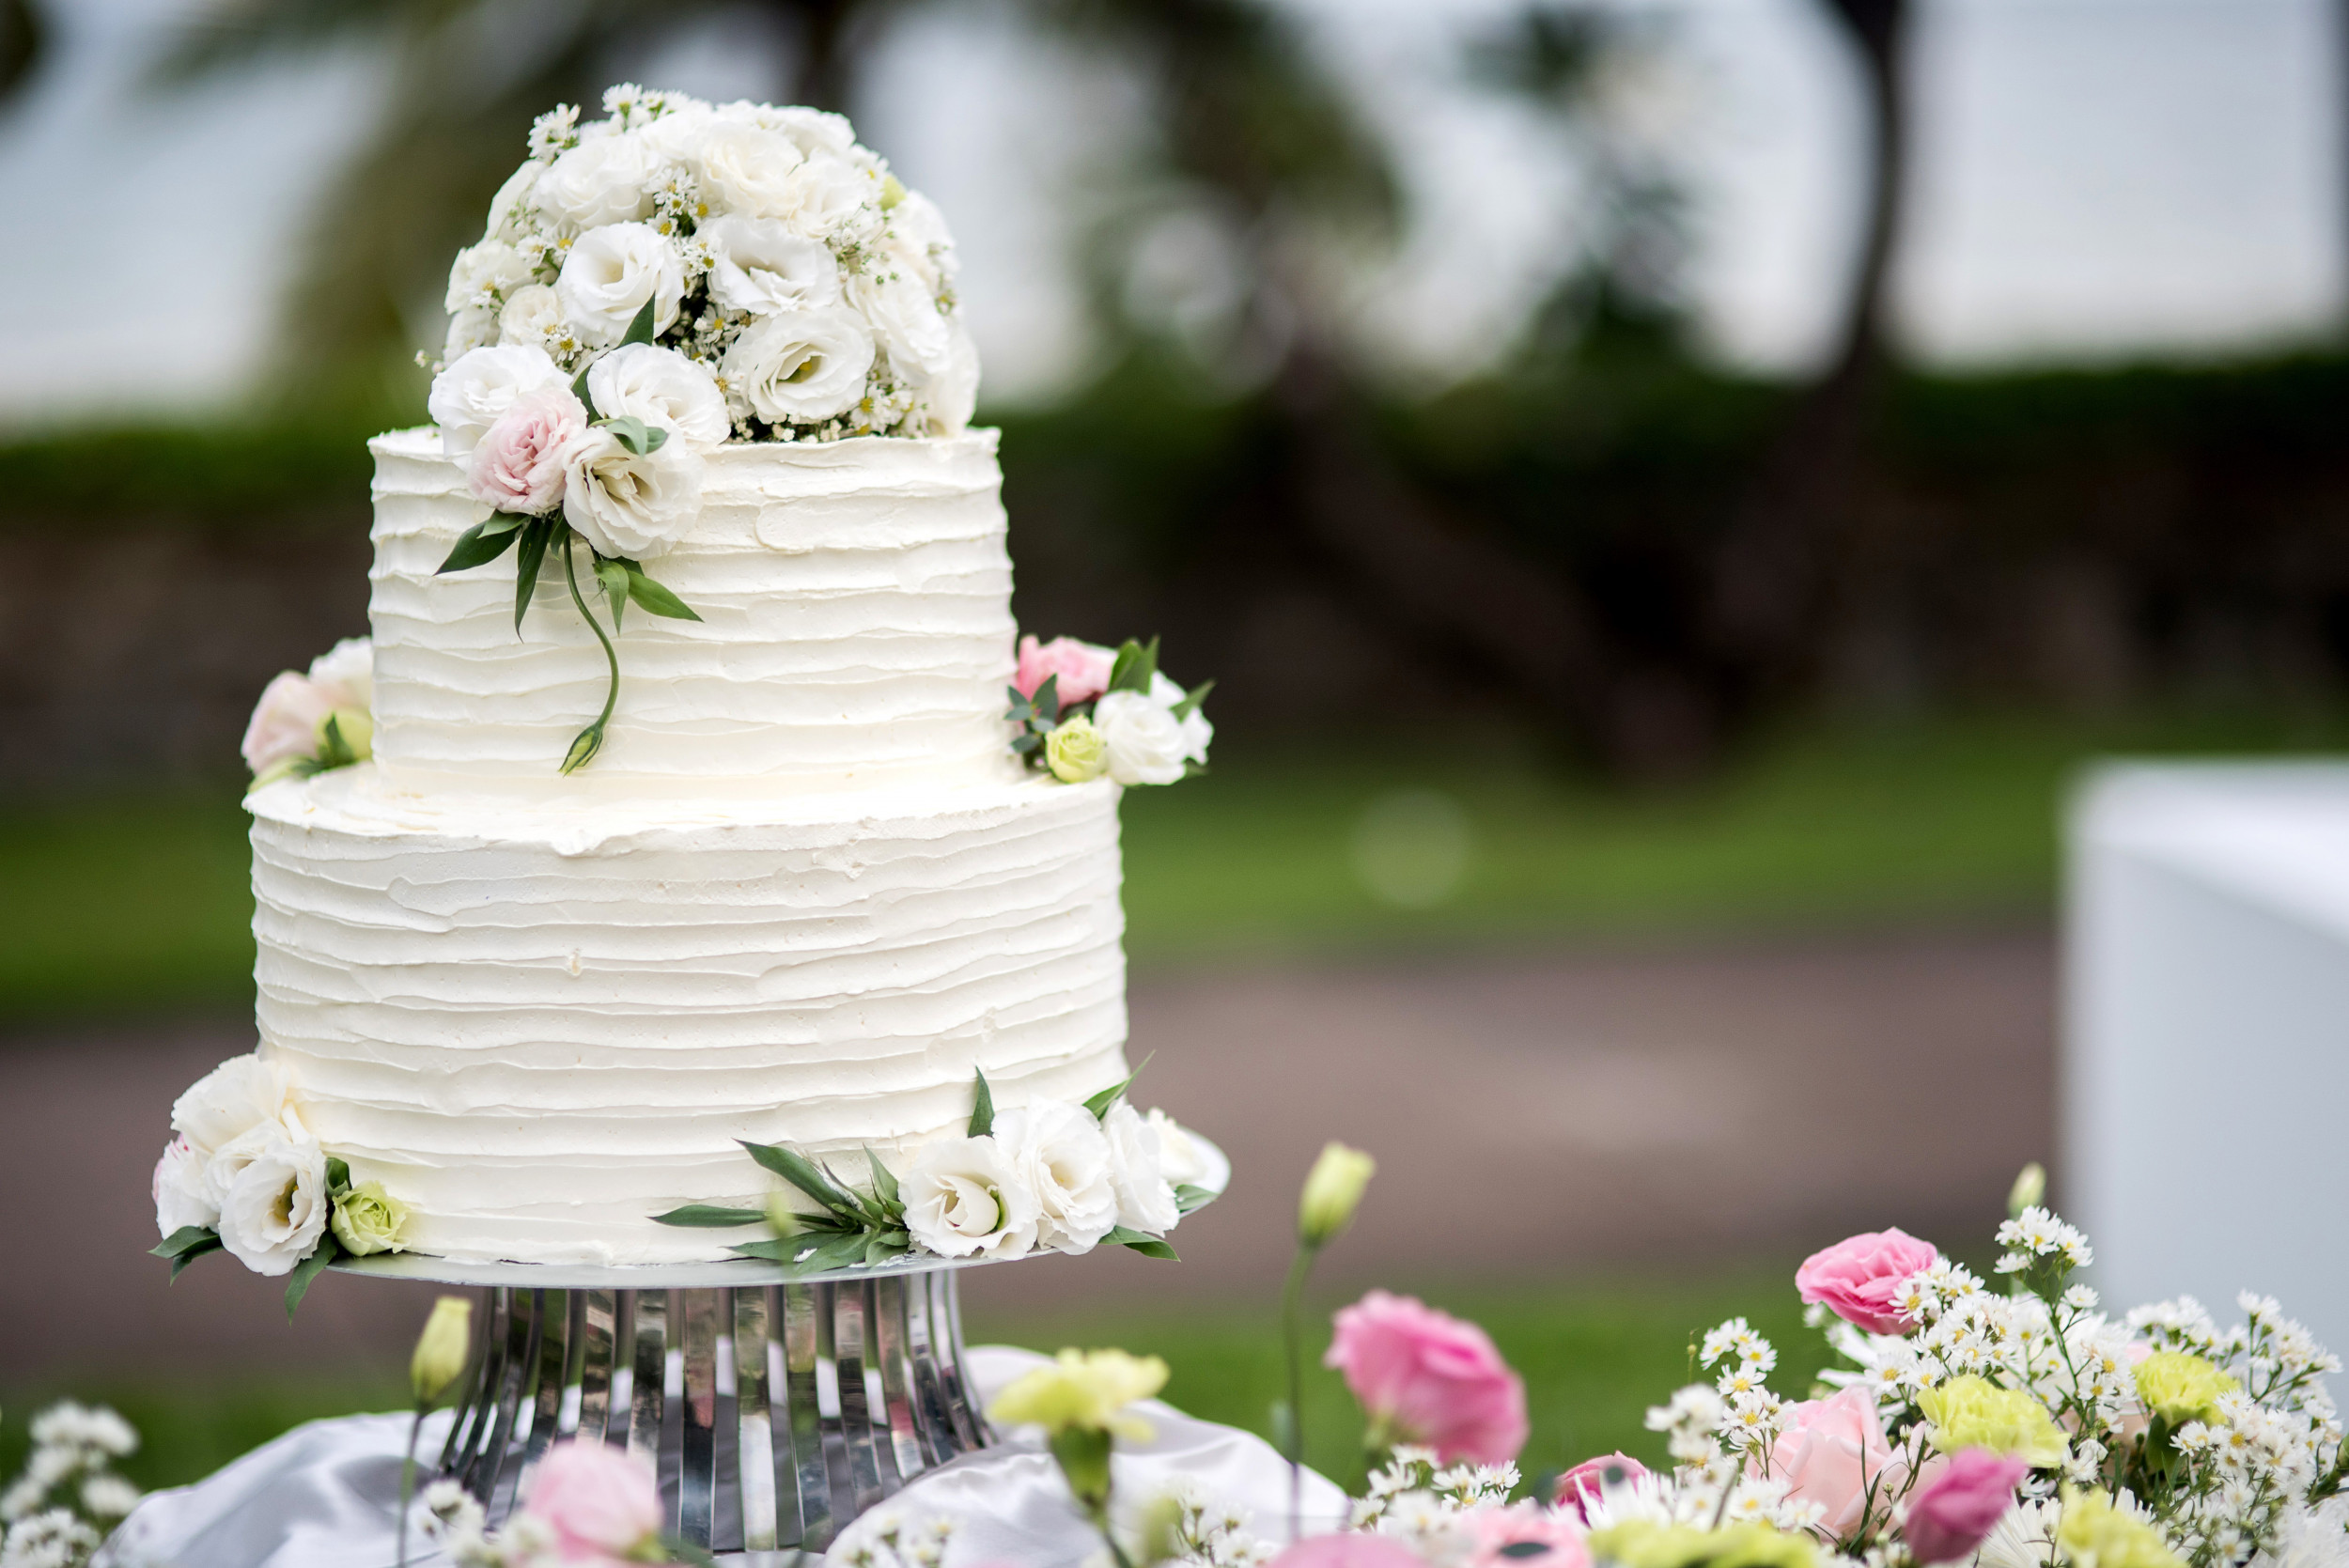 8 Wedding Cake Ideas for 2020 that will Give Amazing Reactions – Giftblooms  Resource Guide